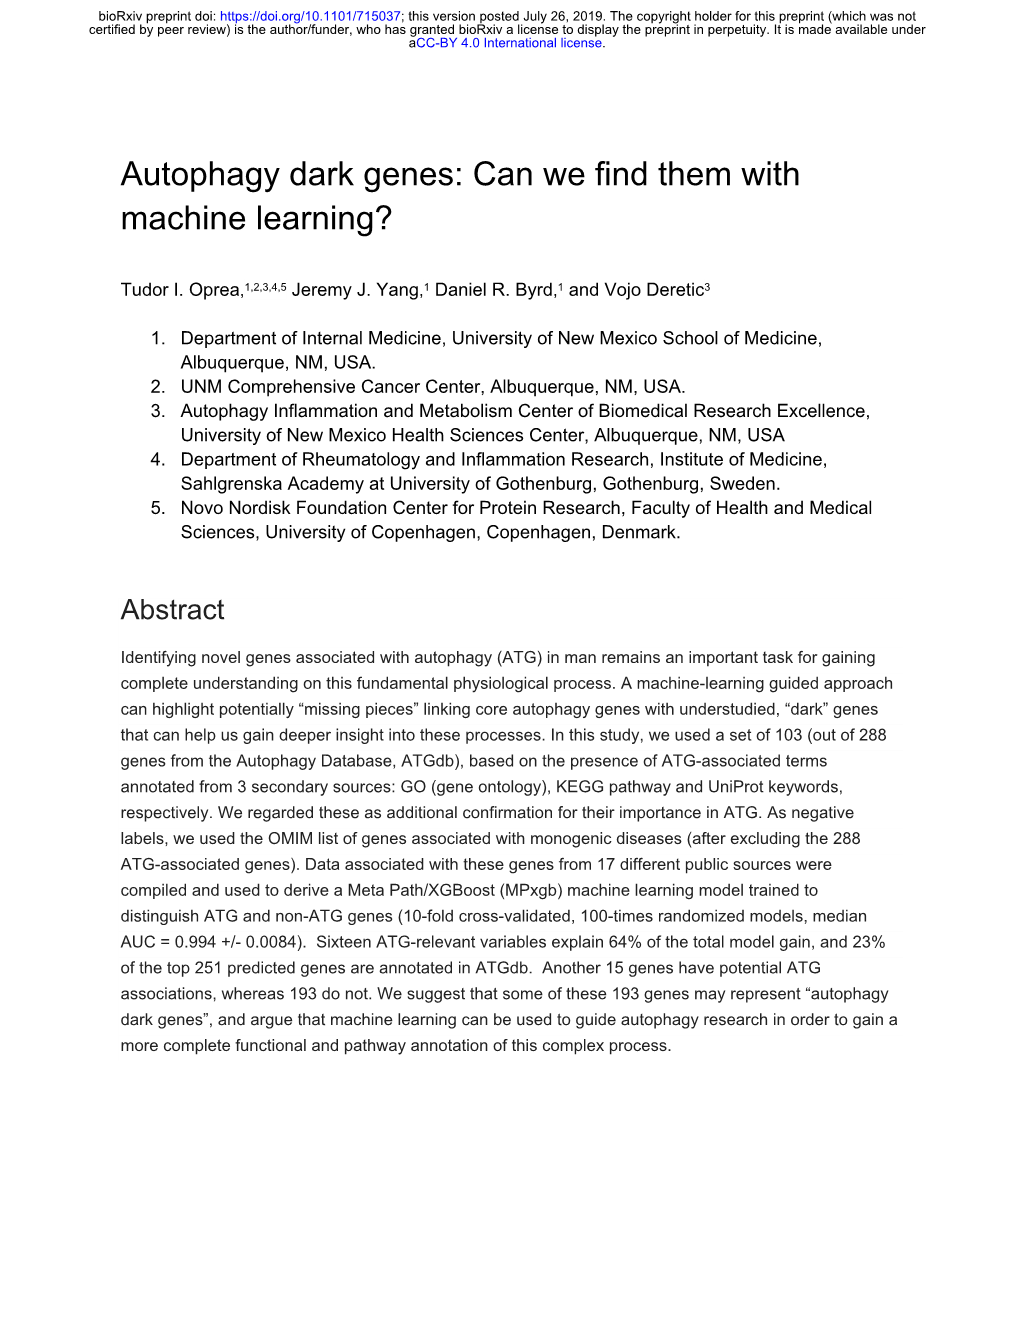 Autophagy Dark Genes: Can We Find Them with Machine Learning?